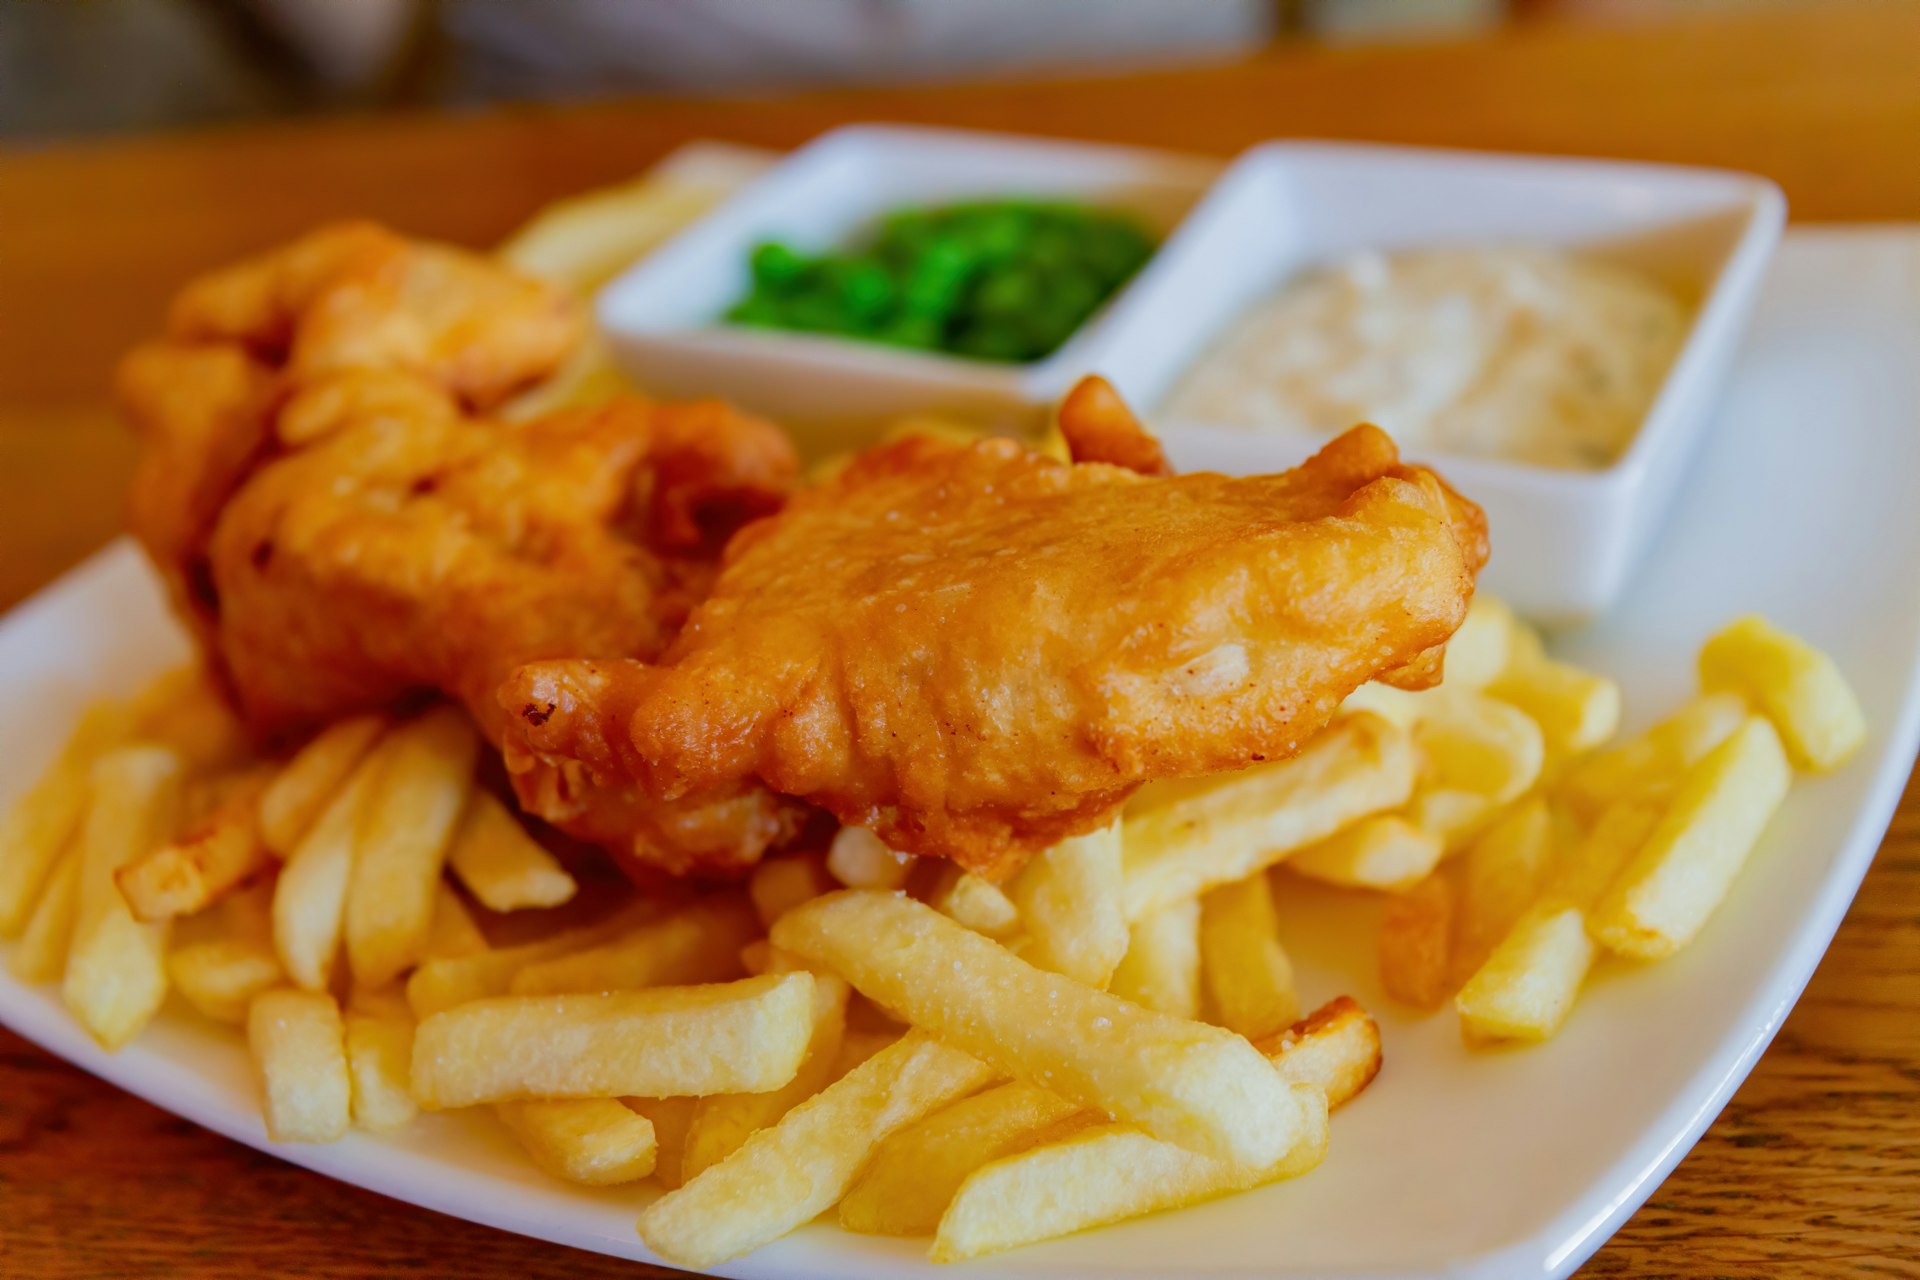 A plate of traditional fish and chips in London